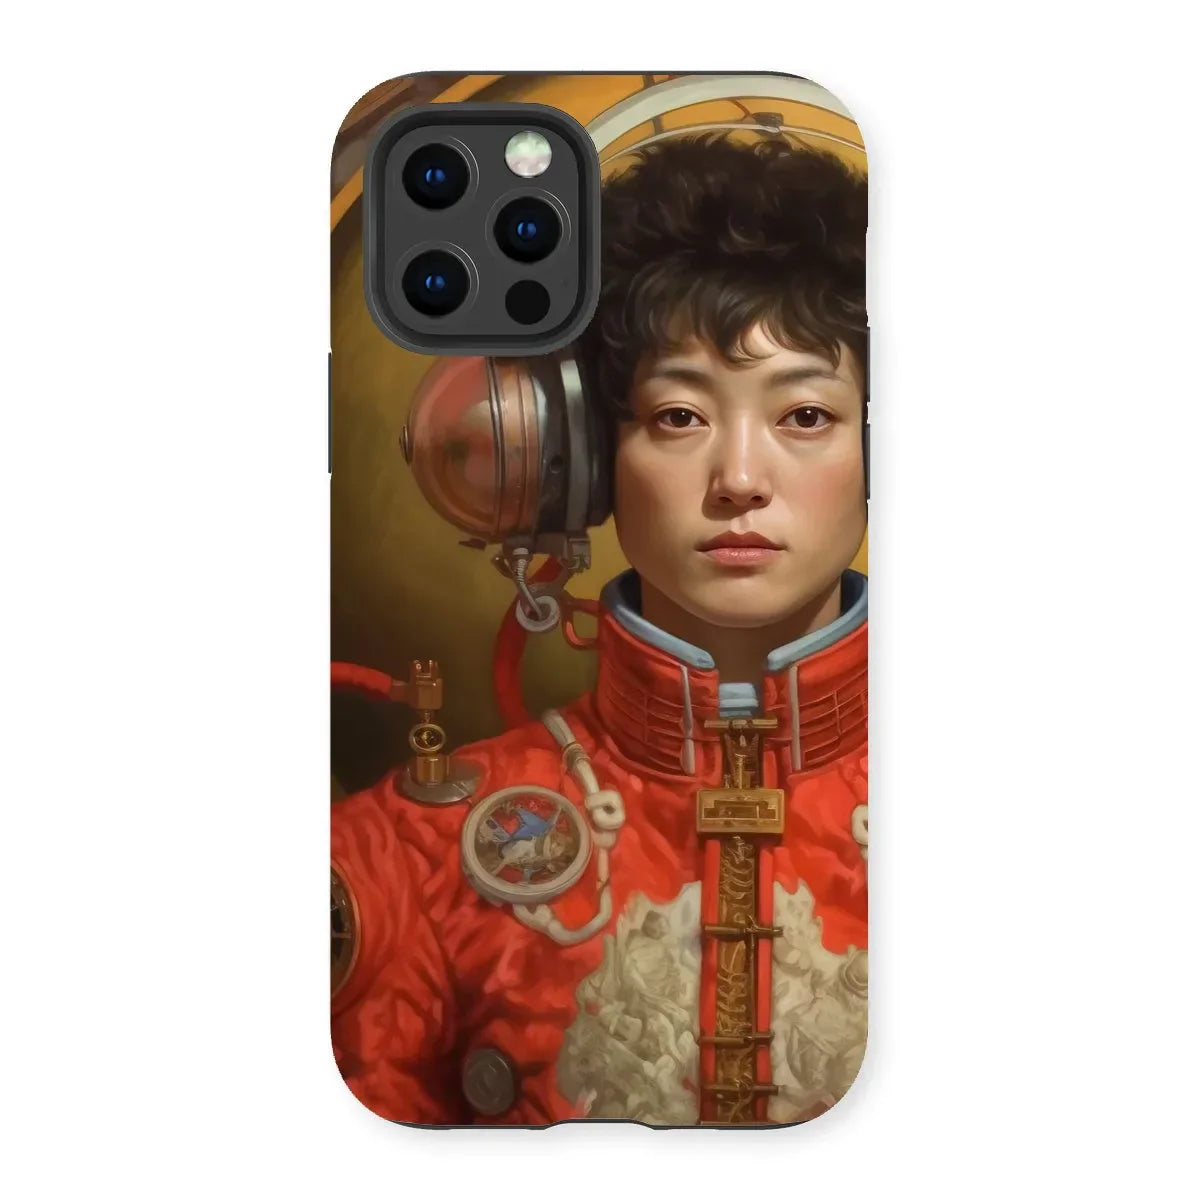 Mùchén - Gay Chinese Astronaut Aesthetic Phone Case - Iphone 13 Pro / Matte - Mobile Phone Cases - Aesthetic Art